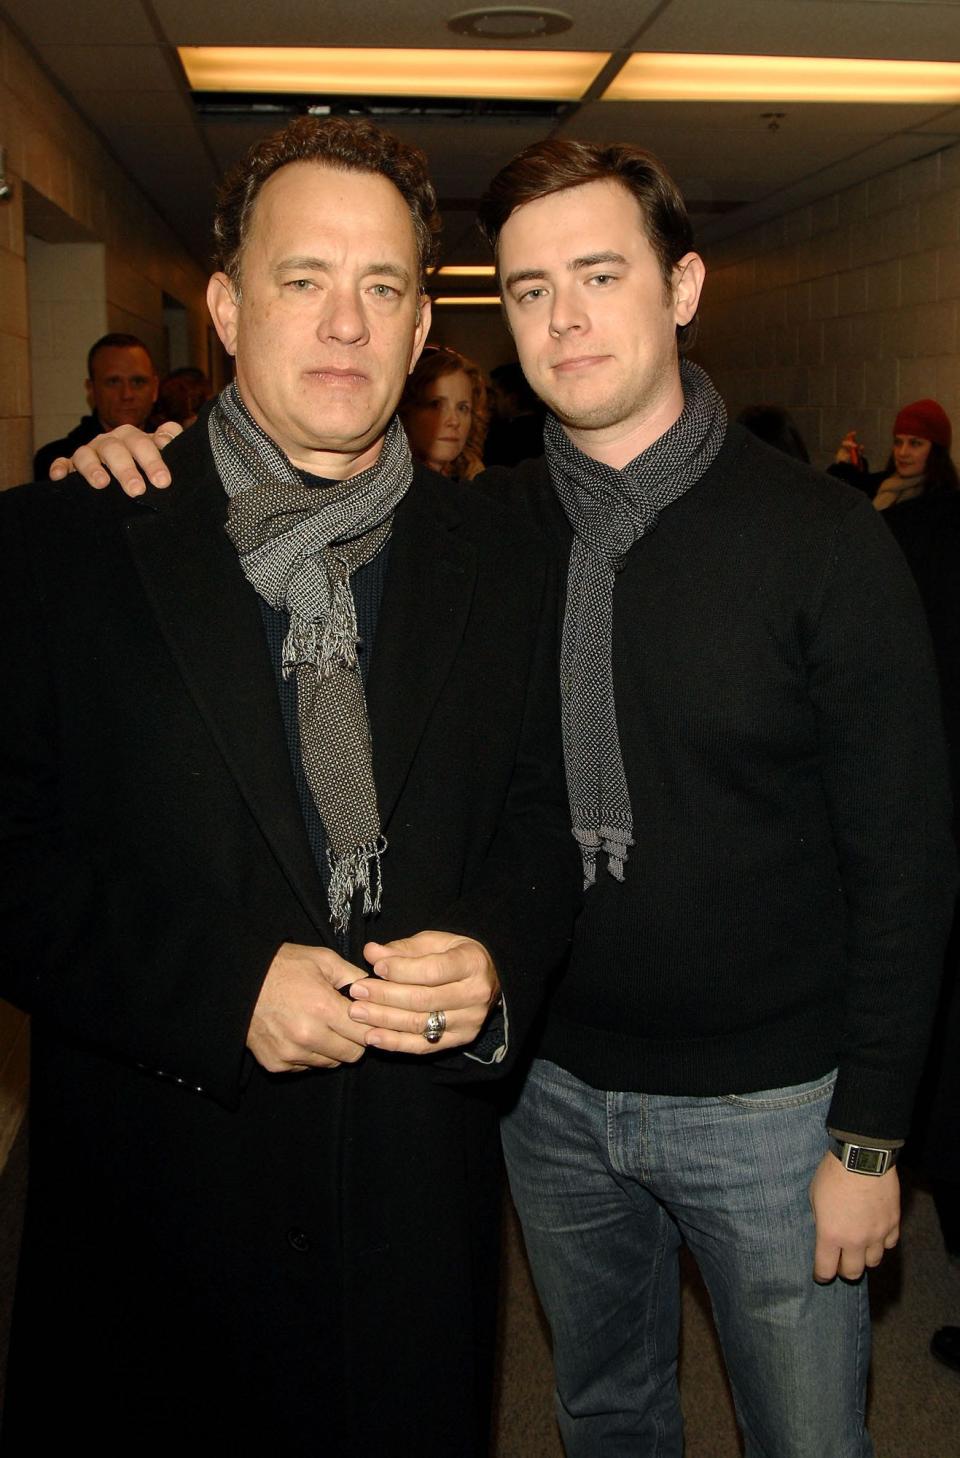 Tom Hanks and Colin Hanks at "The Great Buck Howard" premiere in 2008.